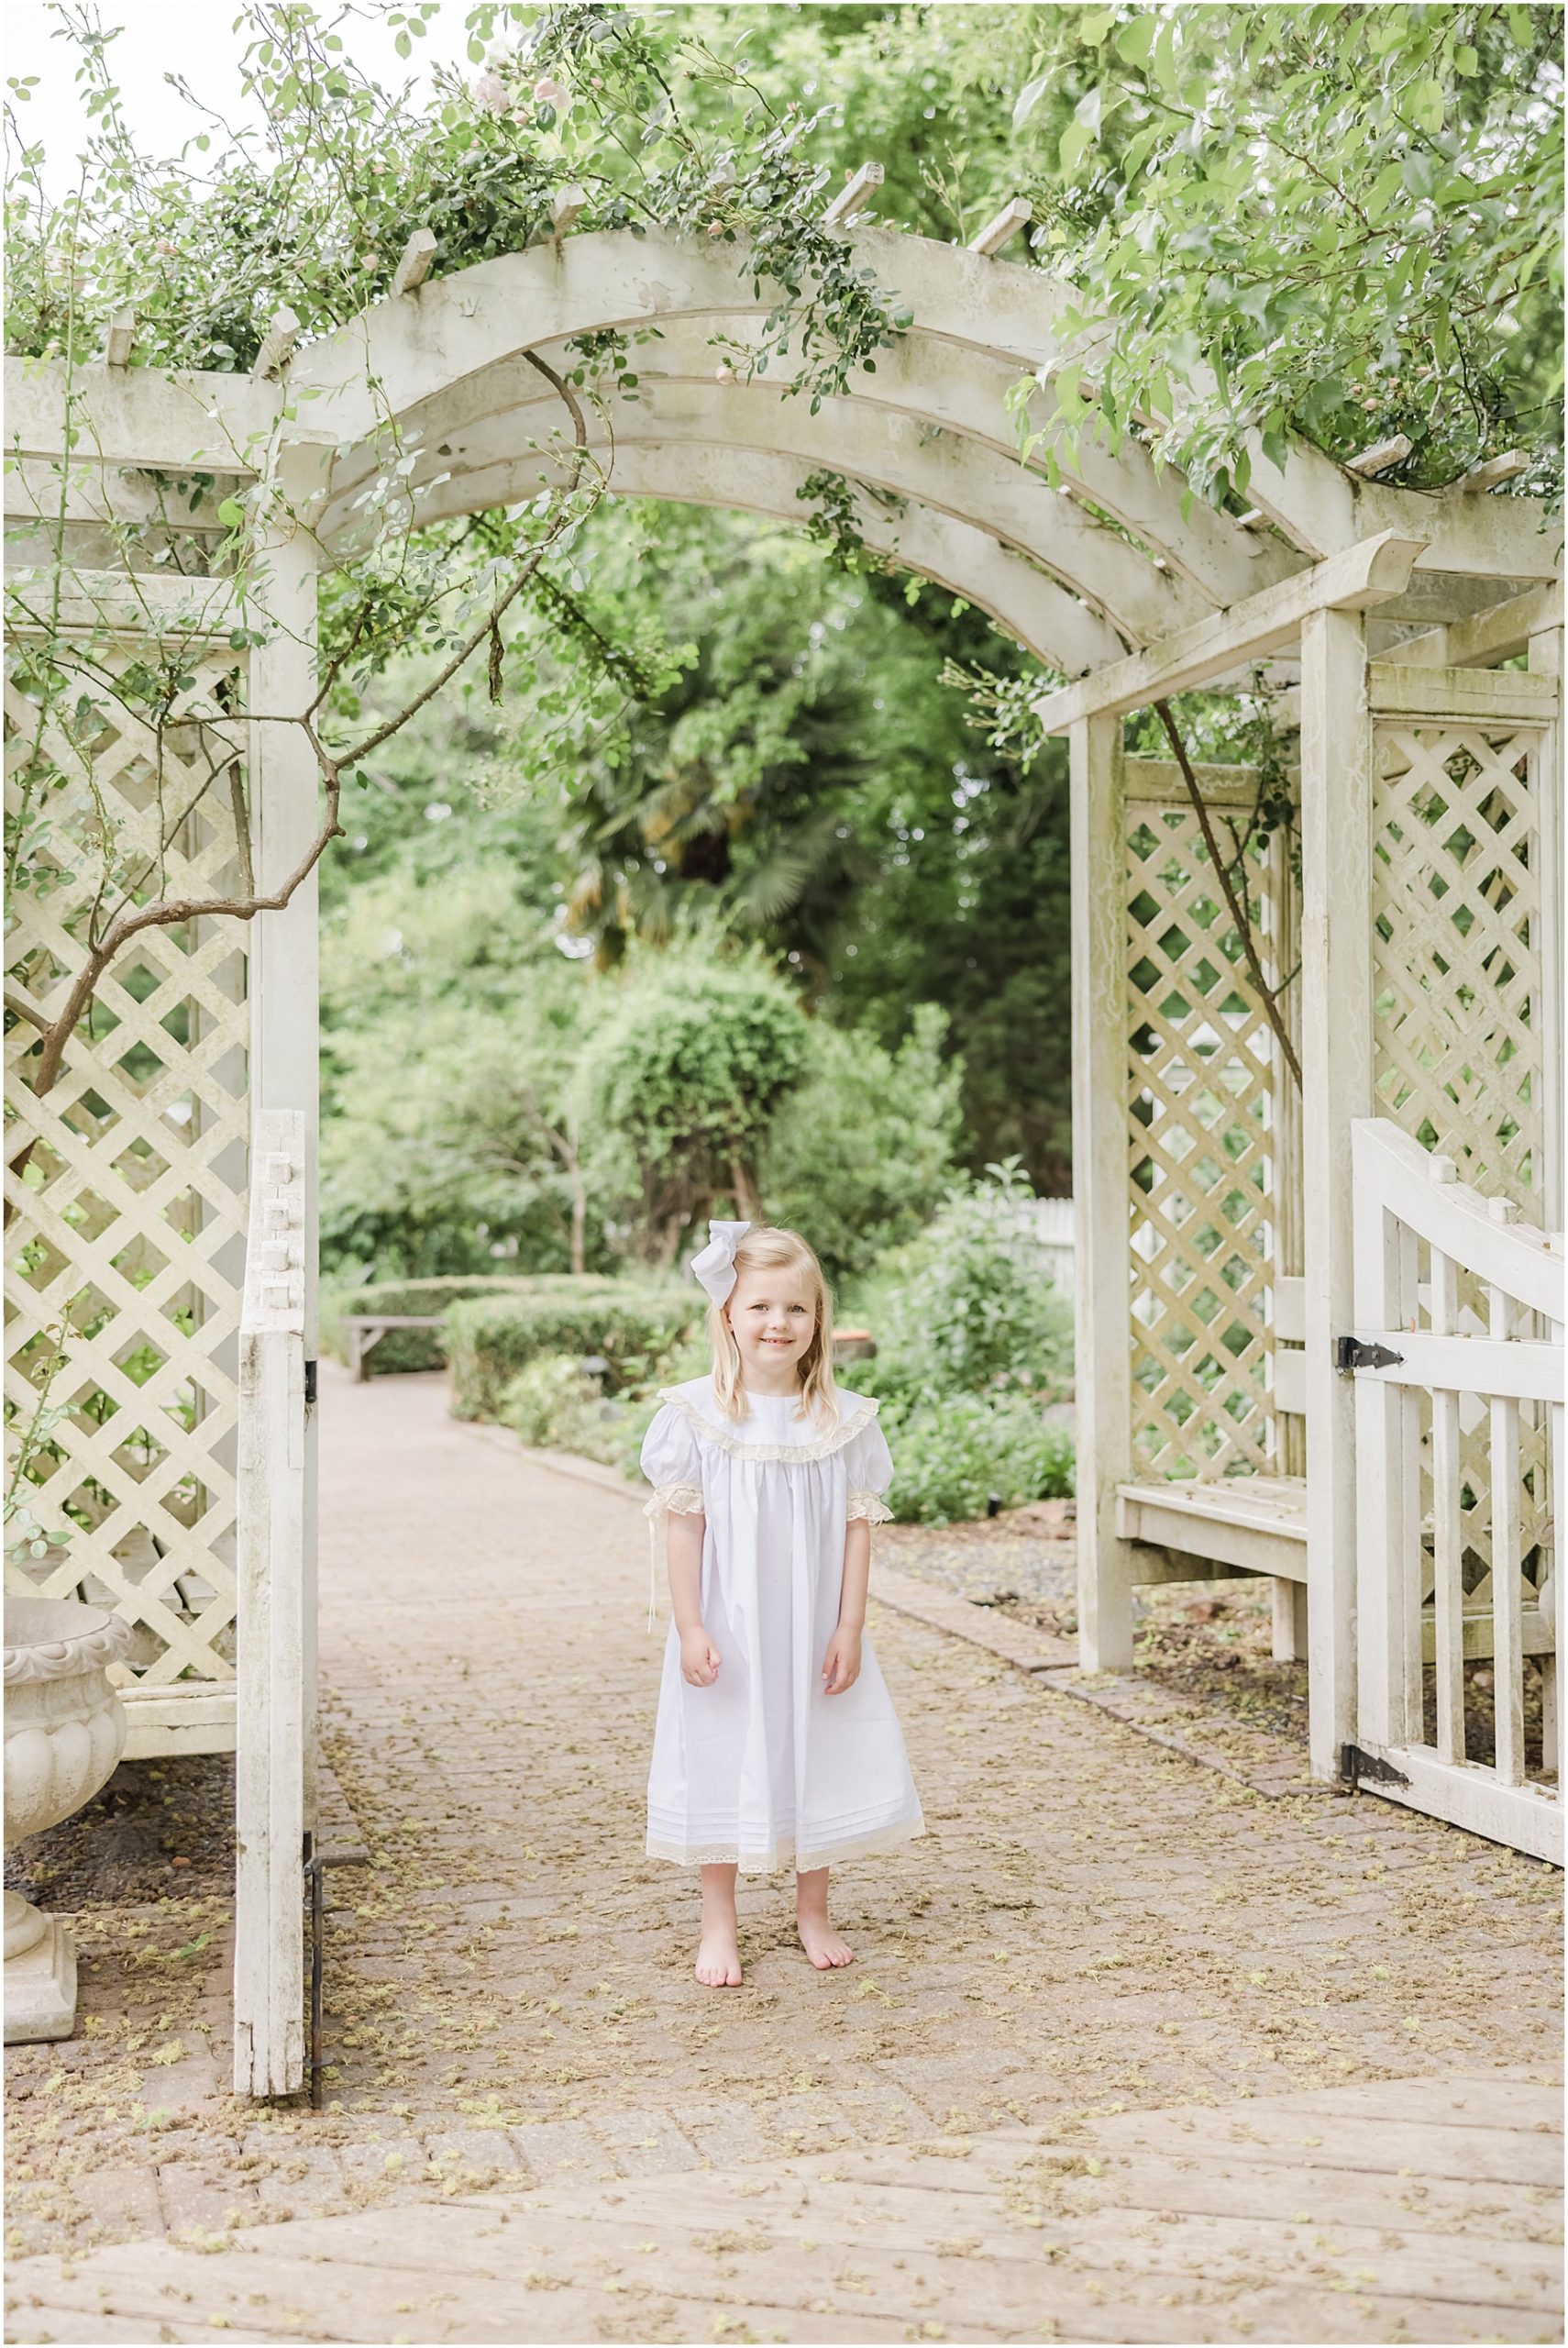 Classic southern portraits in an heirloom dress at Bulloch Hall in Roswell Georgia.